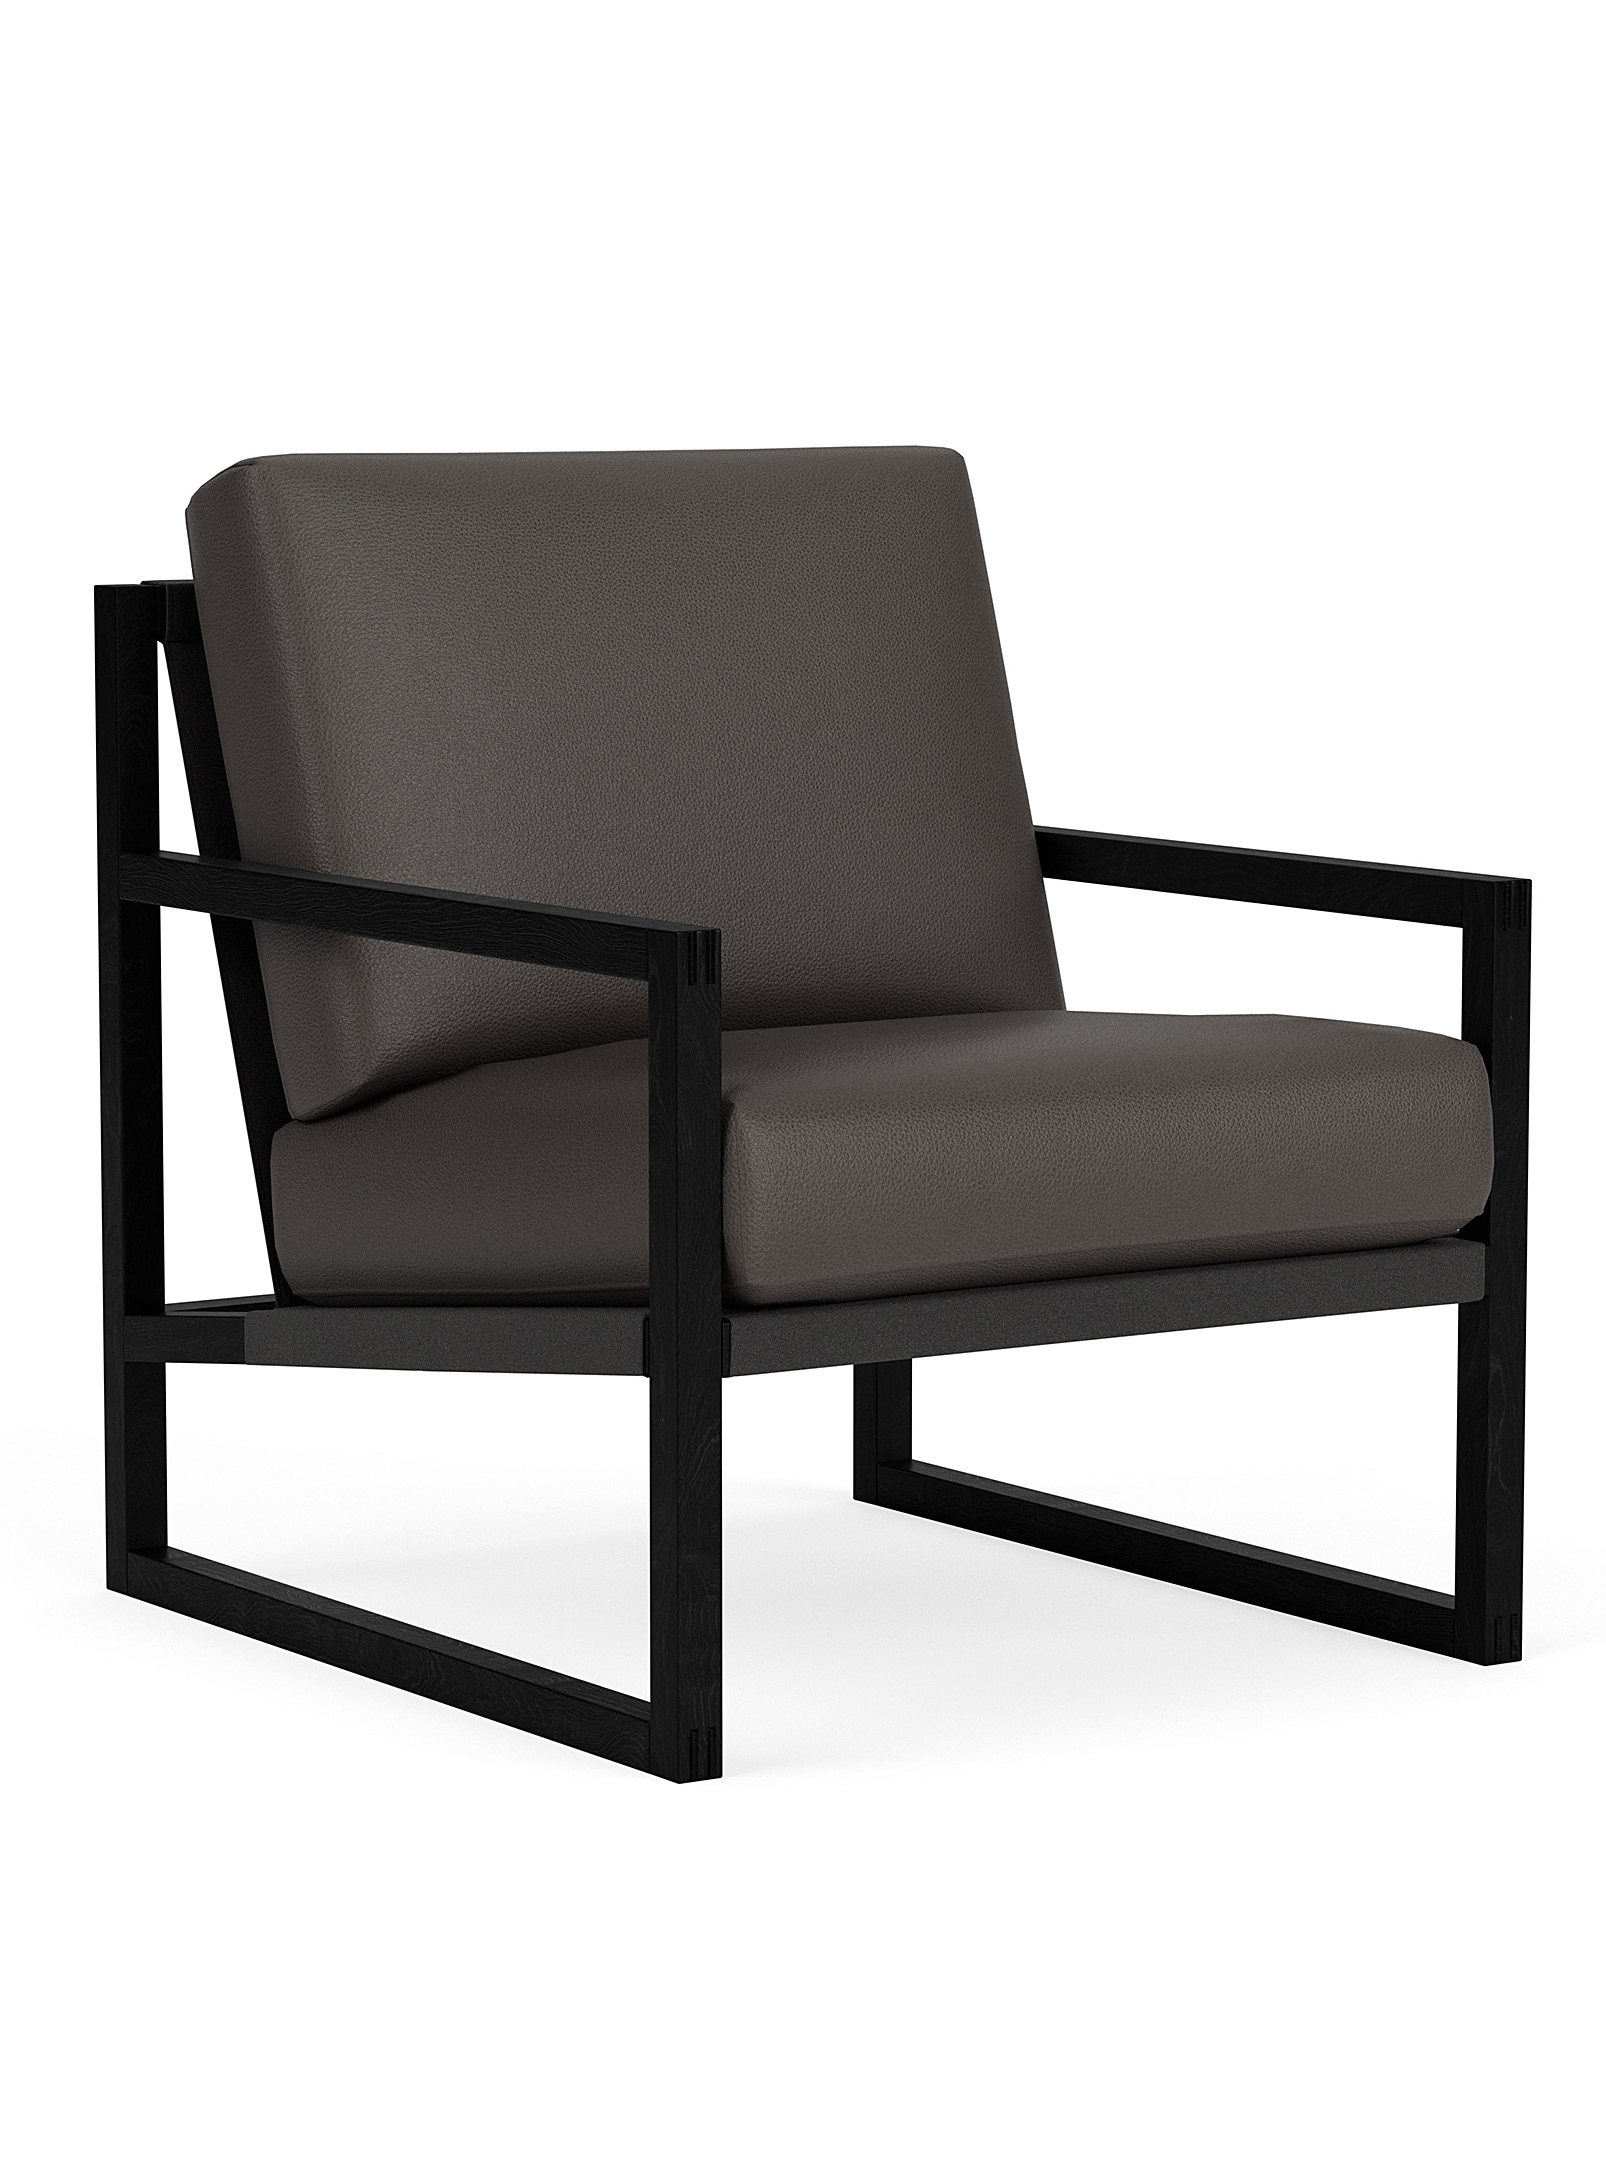 Eq3 Chocolate Leather Chair In Black